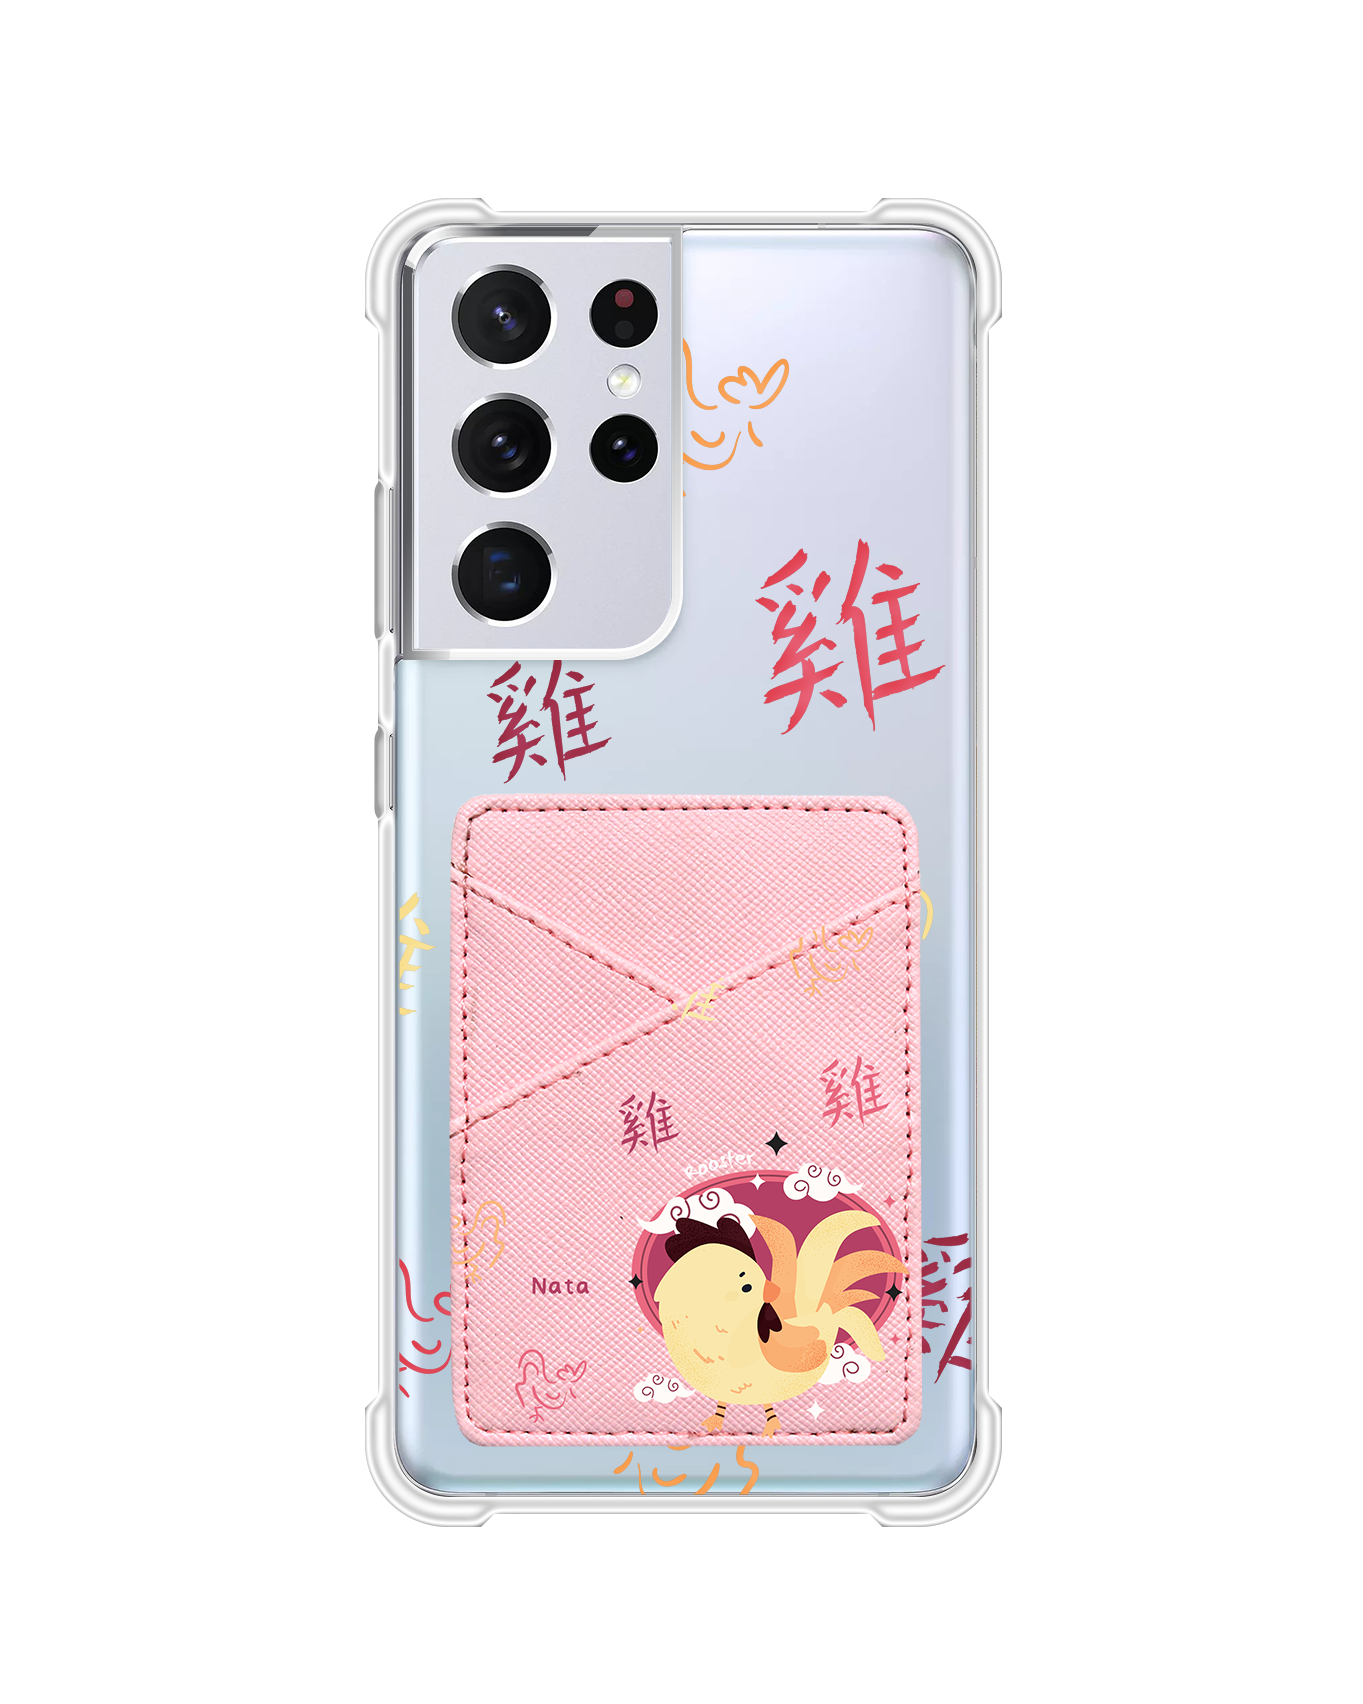 Android Phone Wallet Case - Rooster (Chinese Zodiac / Shio)